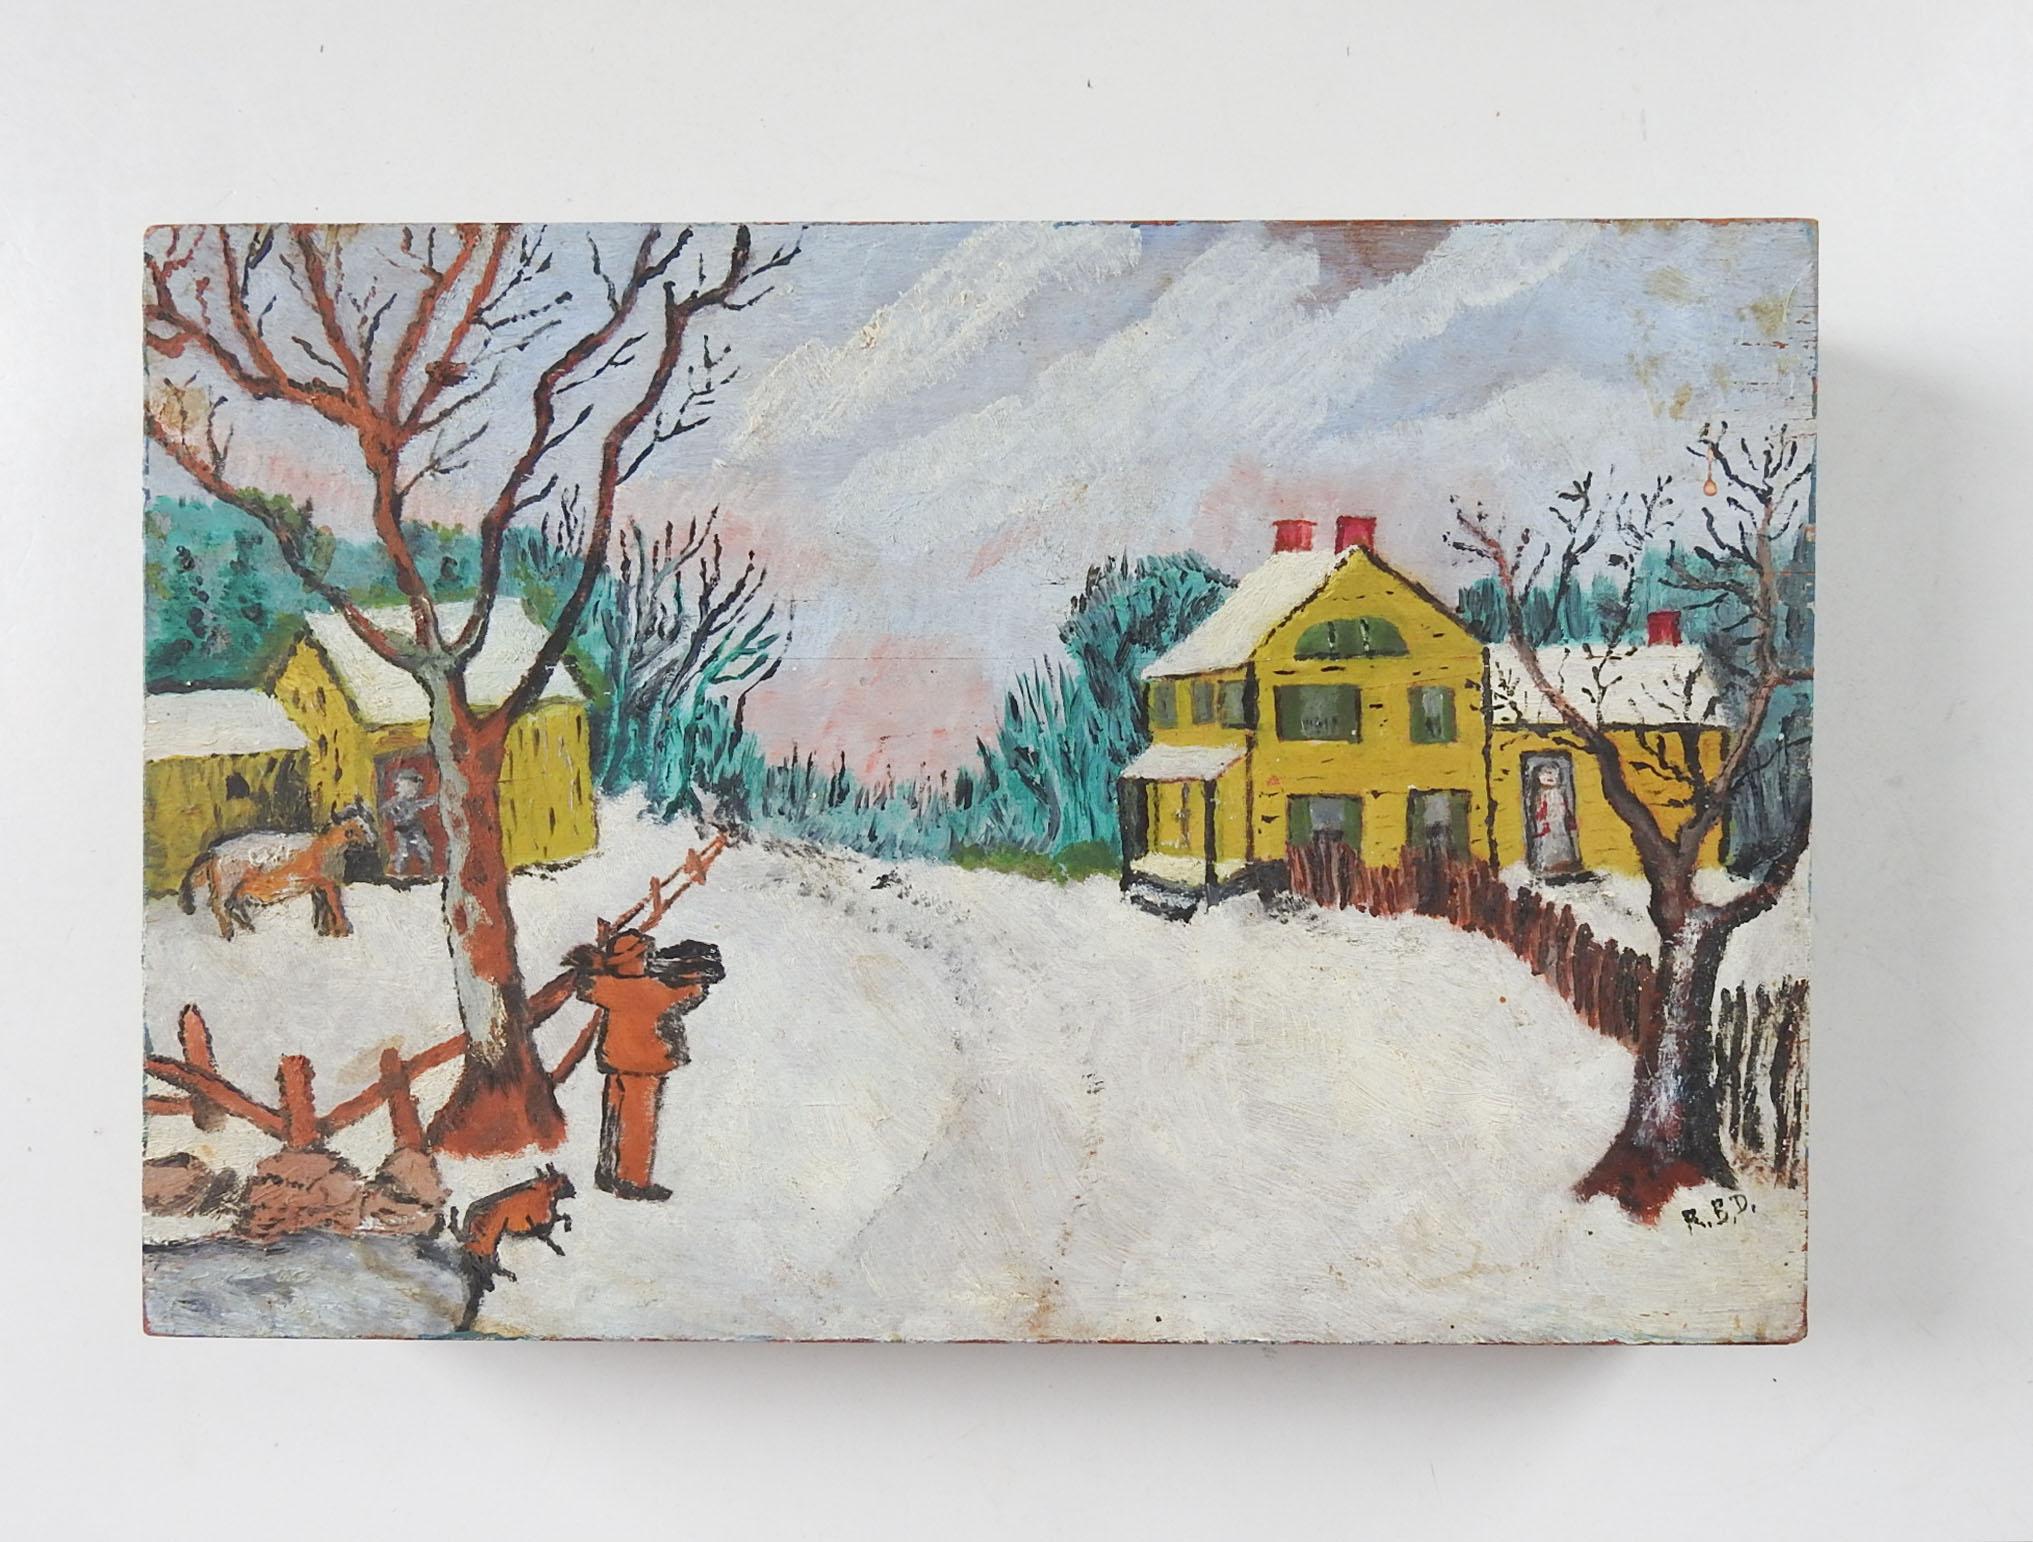 Vintage wood box with folk art painting on lid.  Rustic farm scene in winter with cow, dog and farmer.  Signed RBD lower right corner, bluish paint wash arount edges, hook latches on both sides, penciled illegible name on bottom.  Scuffing to box,